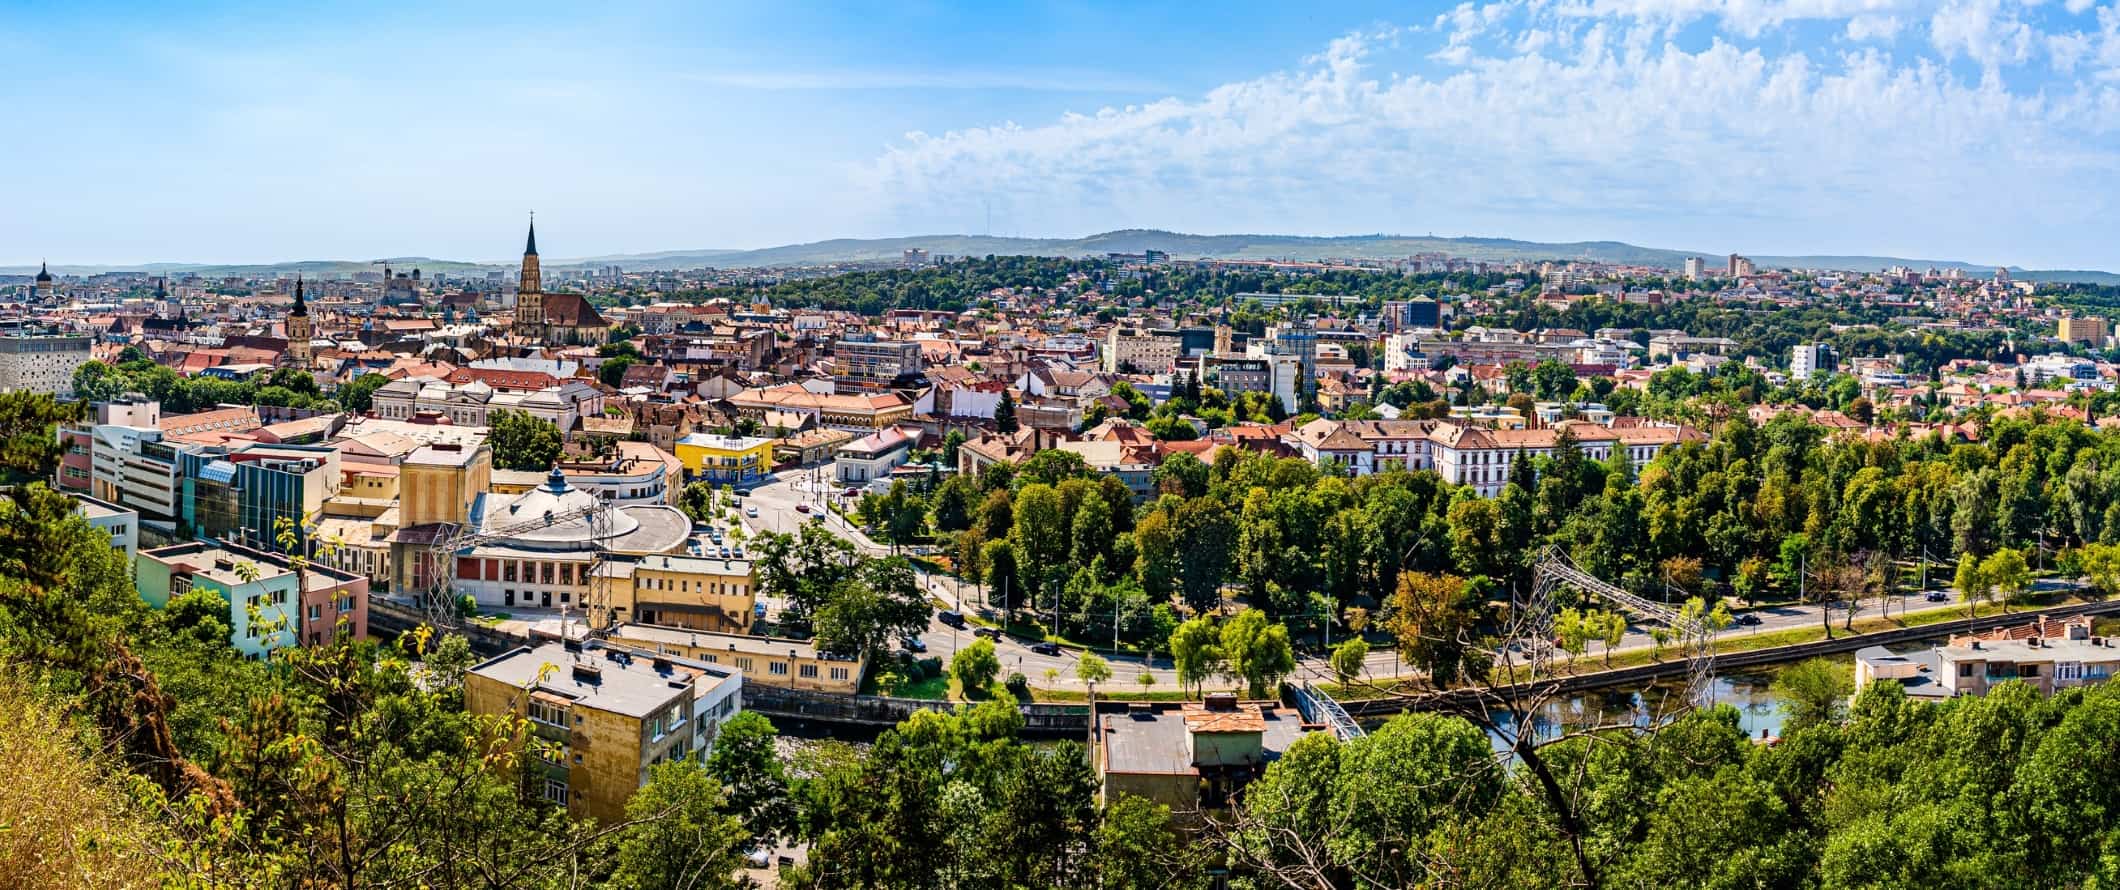 Aerial view of the skyline and rooftops, with a river running through, in the city of Cluj-Napoca, Romania